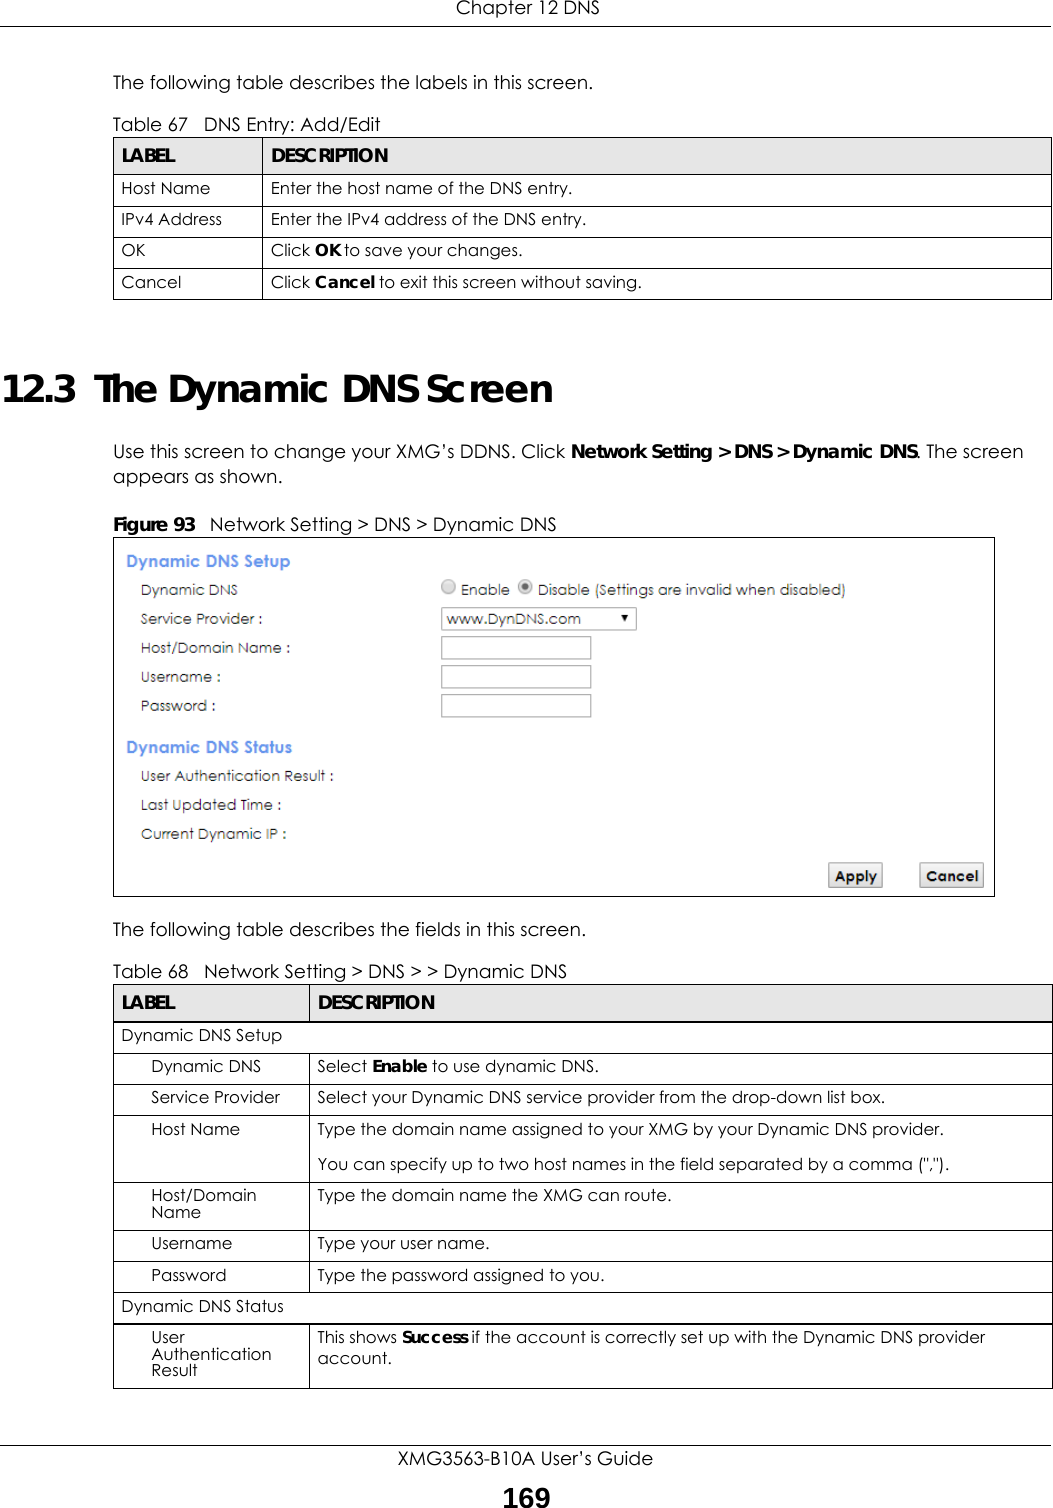  Chapter 12 DNSXMG3563-B10A User’s Guide169The following table describes the labels in this screen. 12.3  The Dynamic DNS ScreenUse this screen to change your XMG’s DDNS. Click Network Setting &gt; DNS &gt; Dynamic DNS. The screen appears as shown.Figure 93   Network Setting &gt; DNS &gt; Dynamic DNSThe following table describes the fields in this screen. Table 67   DNS Entry: Add/EditLABEL DESCRIPTIONHost Name Enter the host name of the DNS entry.IPv4 Address Enter the IPv4 address of the DNS entry.OK Click OK to save your changes.Cancel Click Cancel to exit this screen without saving.Table 68   Network Setting &gt; DNS &gt; &gt; Dynamic DNSLABEL DESCRIPTIONDynamic DNS SetupDynamic DNS Select Enable to use dynamic DNS.Service Provider Select your Dynamic DNS service provider from the drop-down list box.Host Name Type the domain name assigned to your XMG by your Dynamic DNS provider.You can specify up to two host names in the field separated by a comma (&quot;,&quot;).Host/Domain Name Type the domain name the XMG can route.Username Type your user name.Password Type the password assigned to you.Dynamic DNS StatusUser Authentication ResultThis shows Success if the account is correctly set up with the Dynamic DNS provider account. 